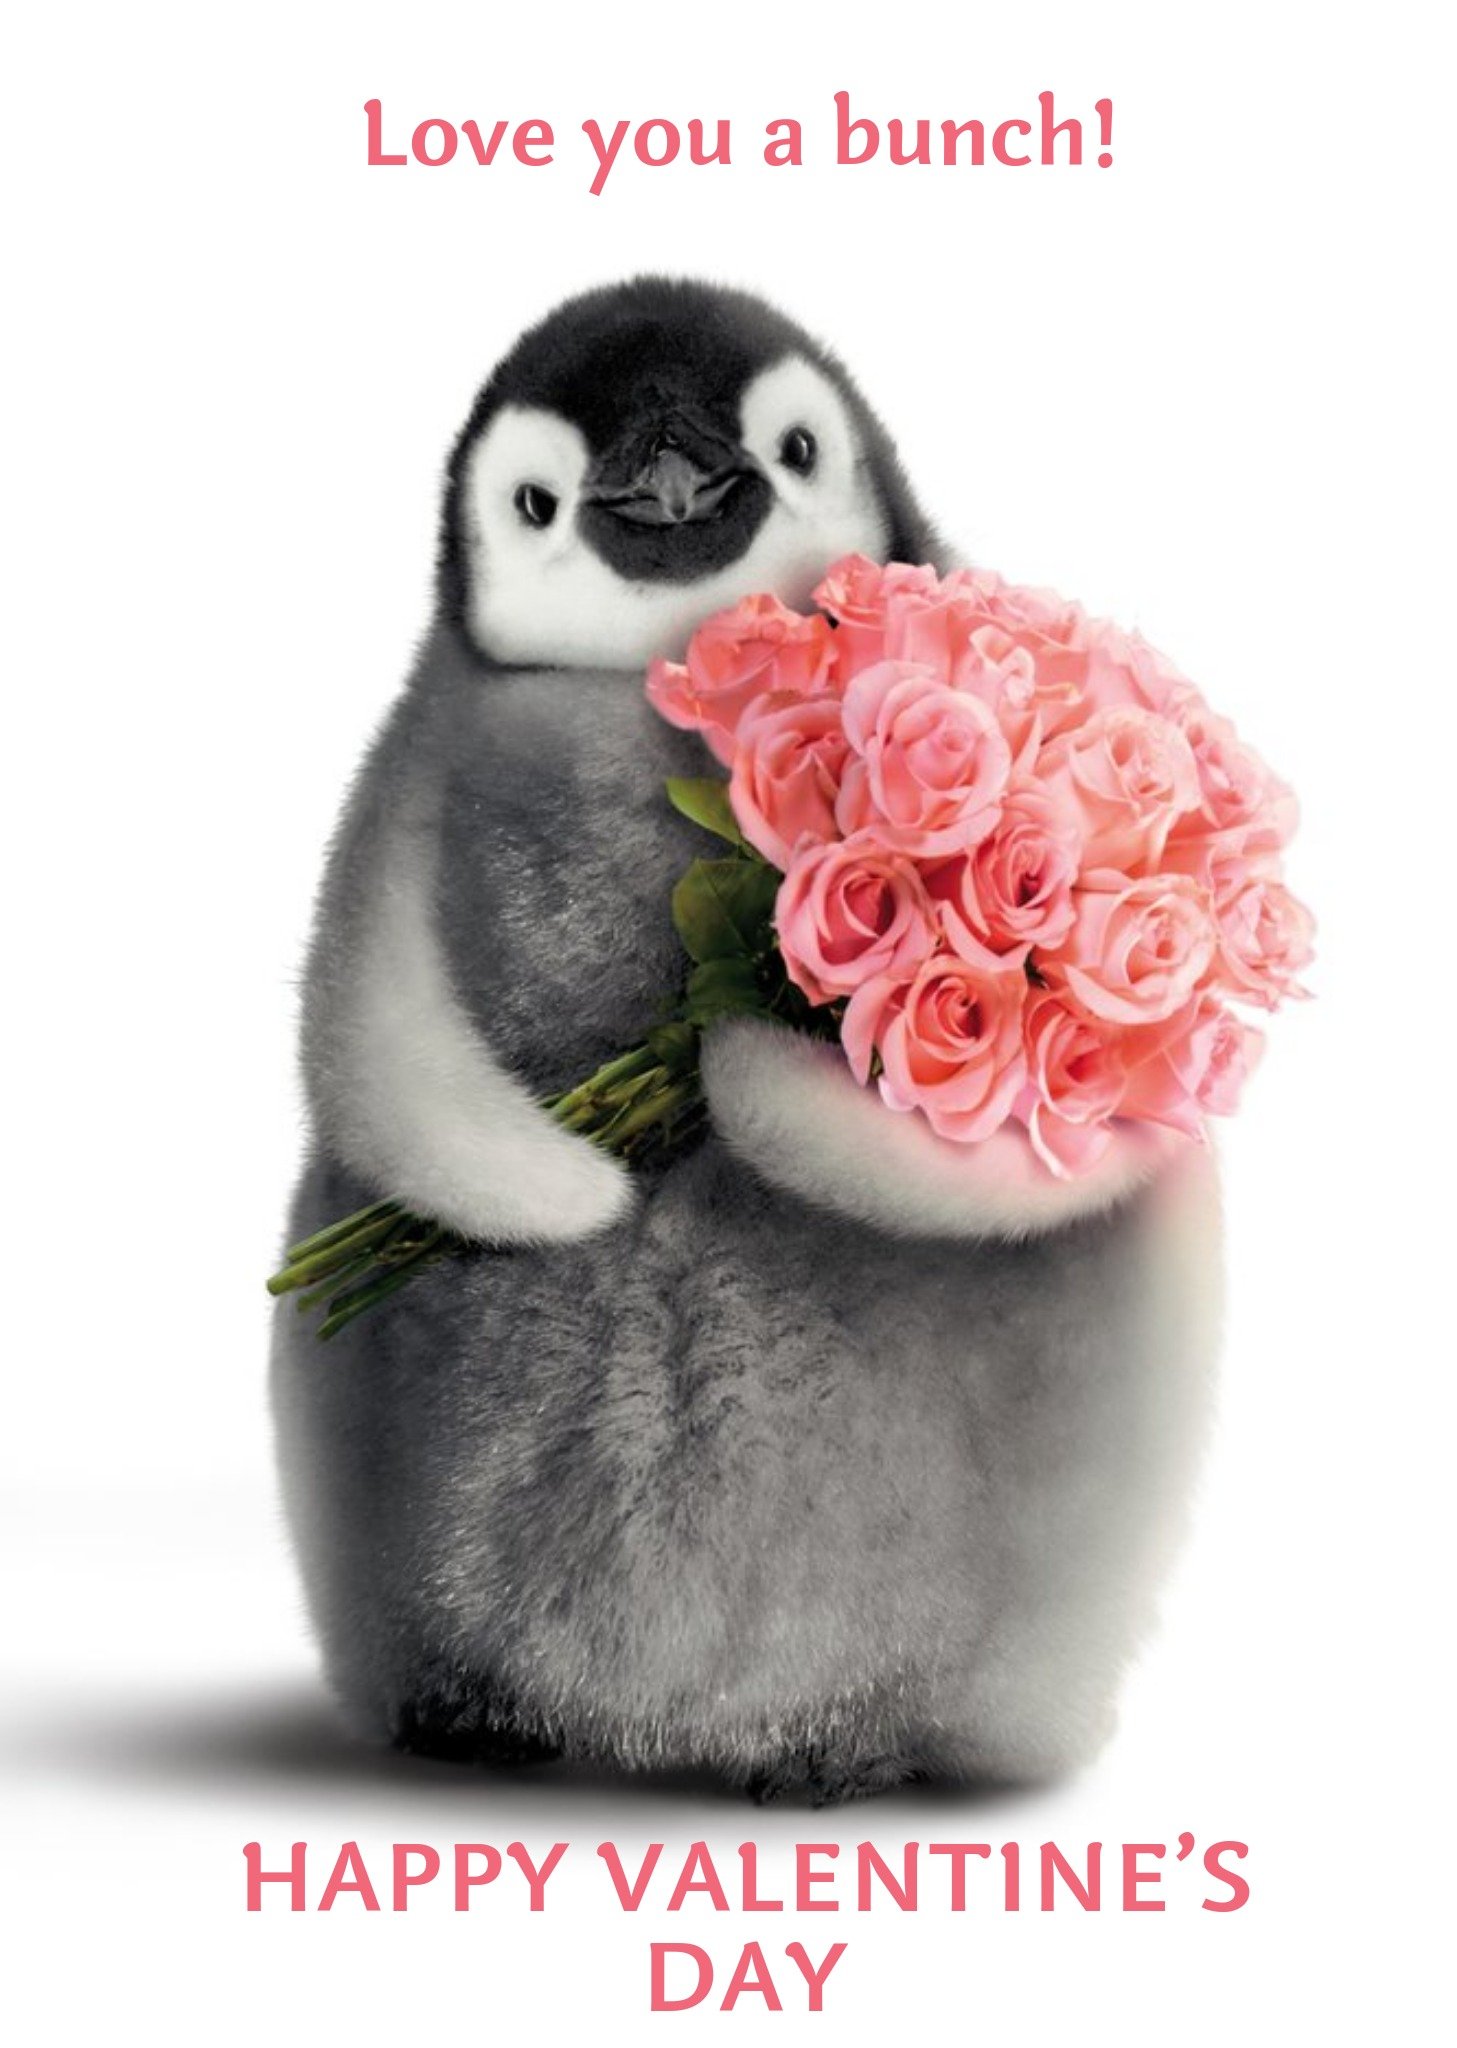 Moonpig Cute Penguin Love You A Bunch Happy Valentine's Day Card Ecard